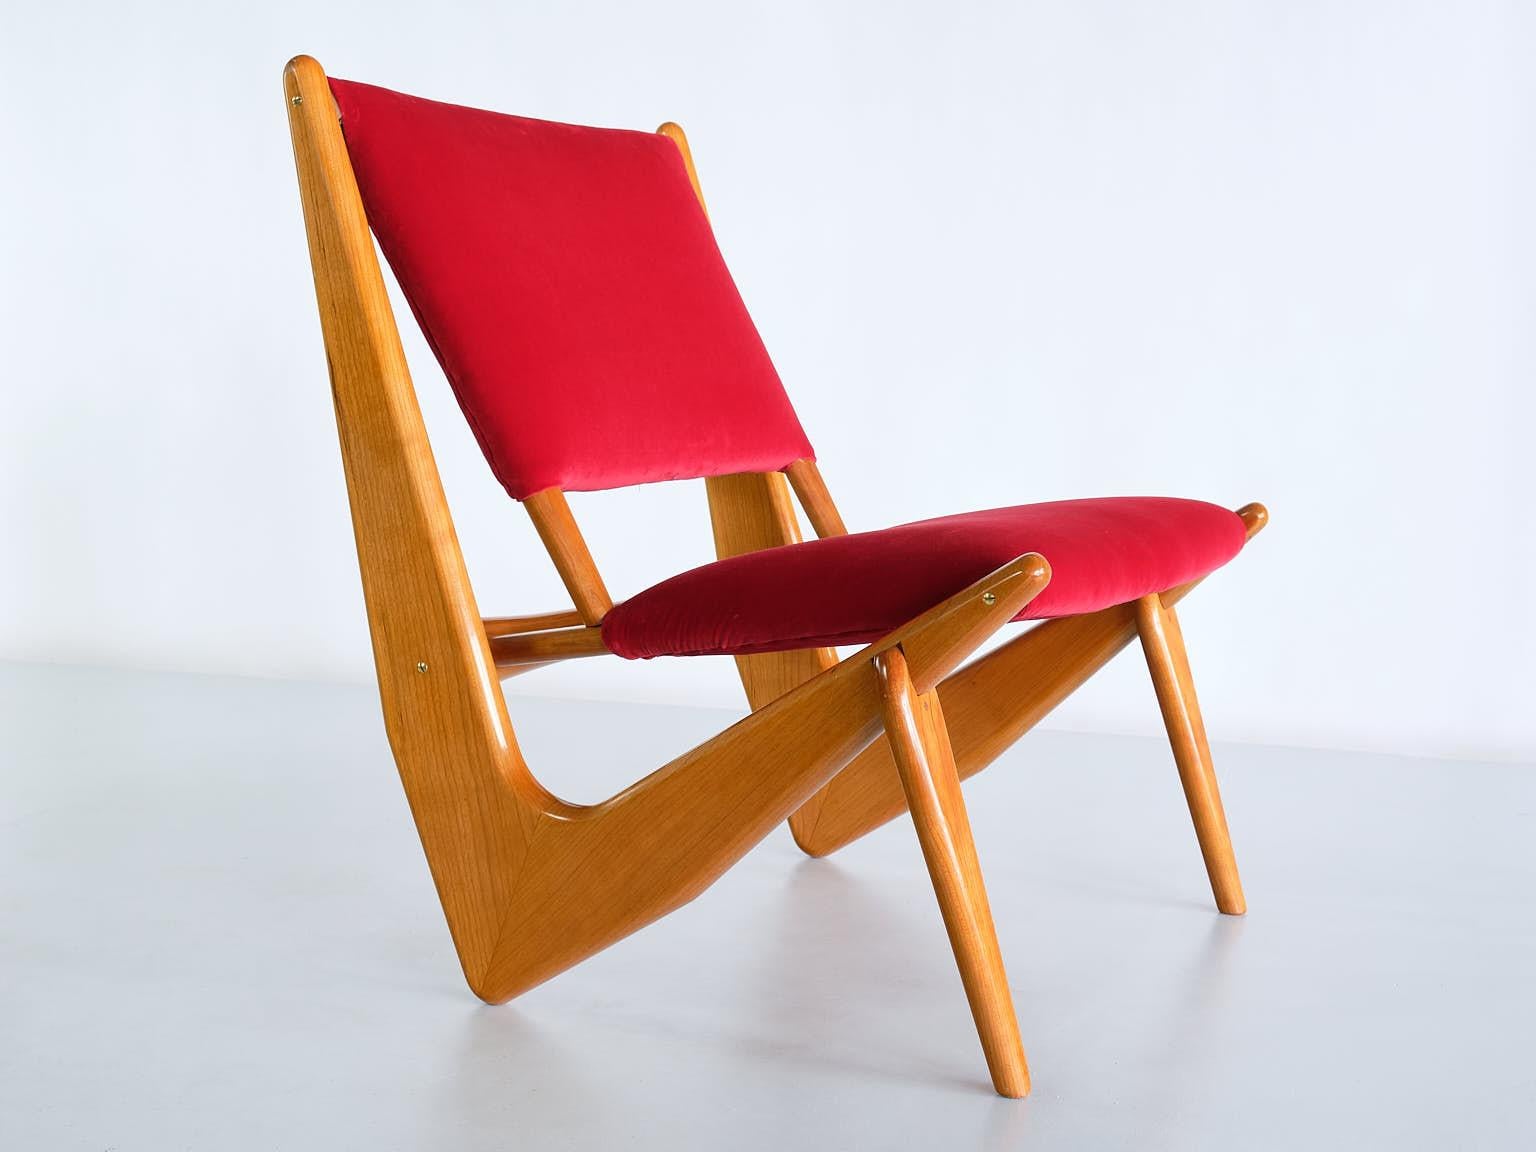 This rare lounge chair was designed by Bertil Behrmanand produced by Engens Möbelfabriker in Sweden, 1956. The model is numbered 233 and is part of the designer’s “Presens” series. The striking frame in lacquered solid oak wood is marked by the